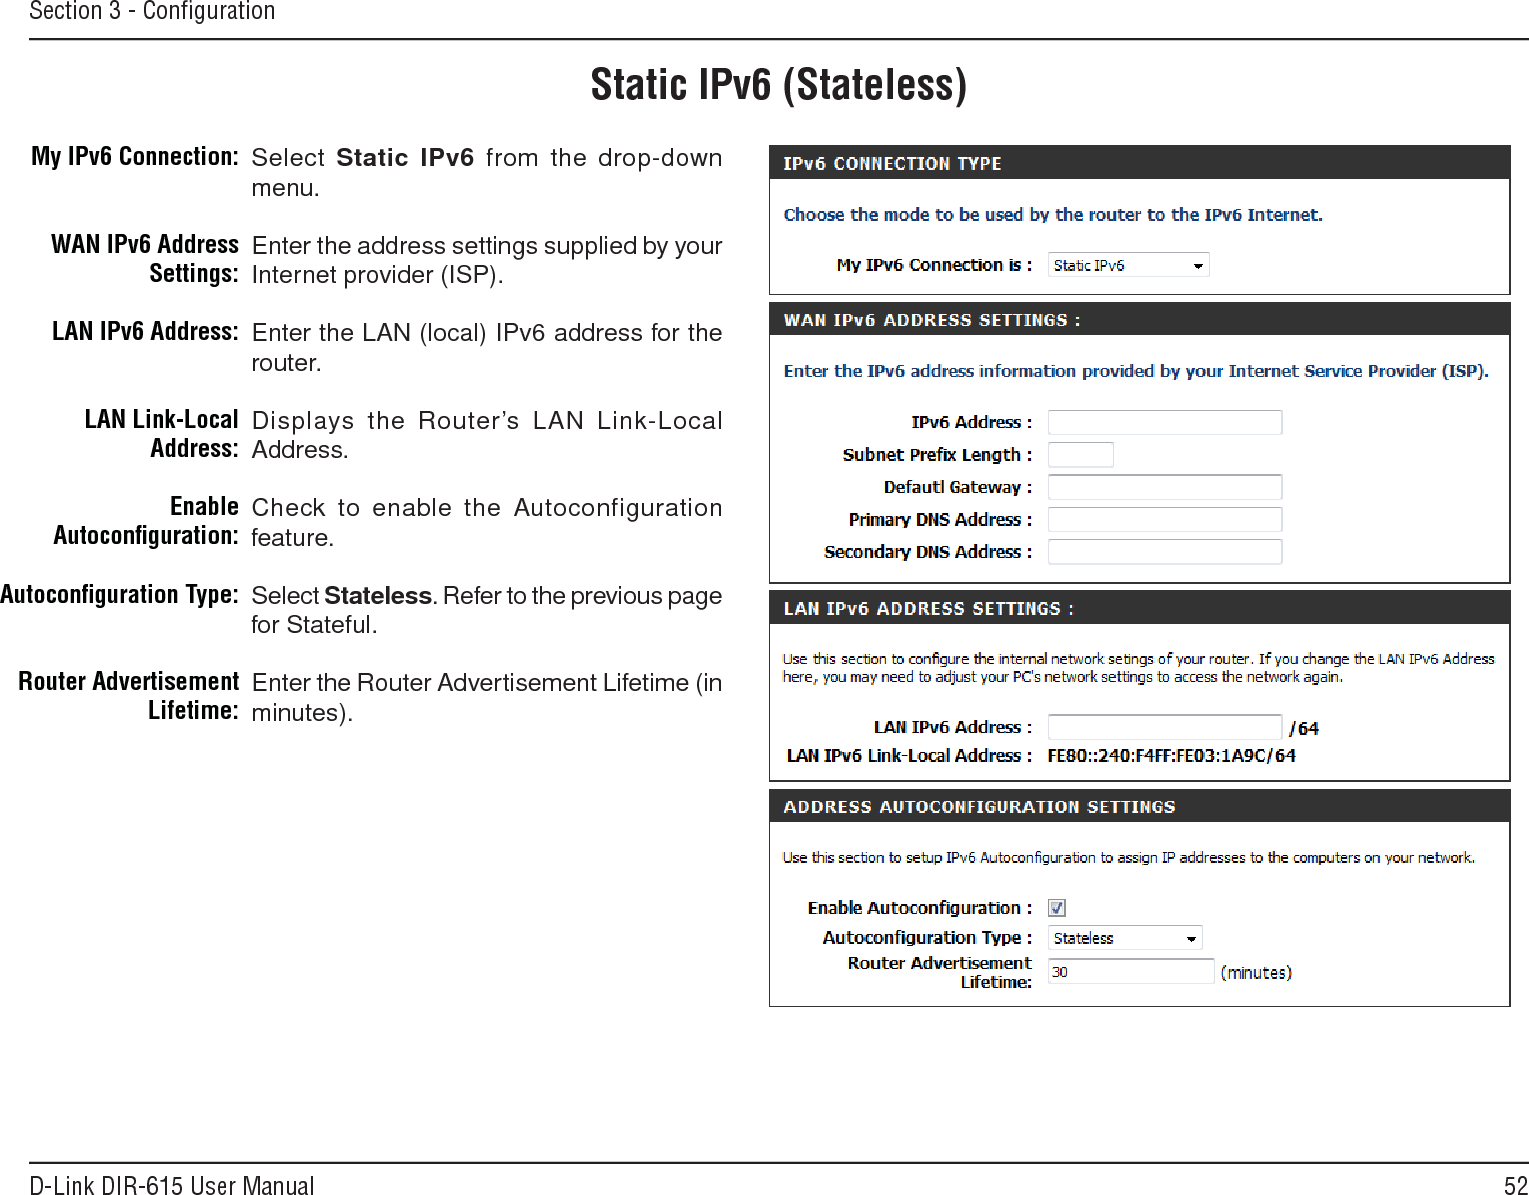 52D-Link DIR-615 User ManualSection 3 - ConﬁgurationStatic IPv6 (Stateless)Select Static.IPv6 from the drop-down menu.Enter the address settings supplied by your Internet provider (ISP). Enter the LAN (local) IPv6 address for the router. Displays the Router’s LAN Link-Local Address.Check to enable the  Autoconfiguration feature.Select Stateless. Refer to the previous page for Stateful.Enter the Router Advertisement Lifetime (in minutes).My IPv6 Connection:WAN IPv6 Address Settings:LAN IPv6 Address:LAN Link-Local Address:Enable Autoconﬁguration:Autoconﬁguration Type:Router Advertisement  Lifetime: